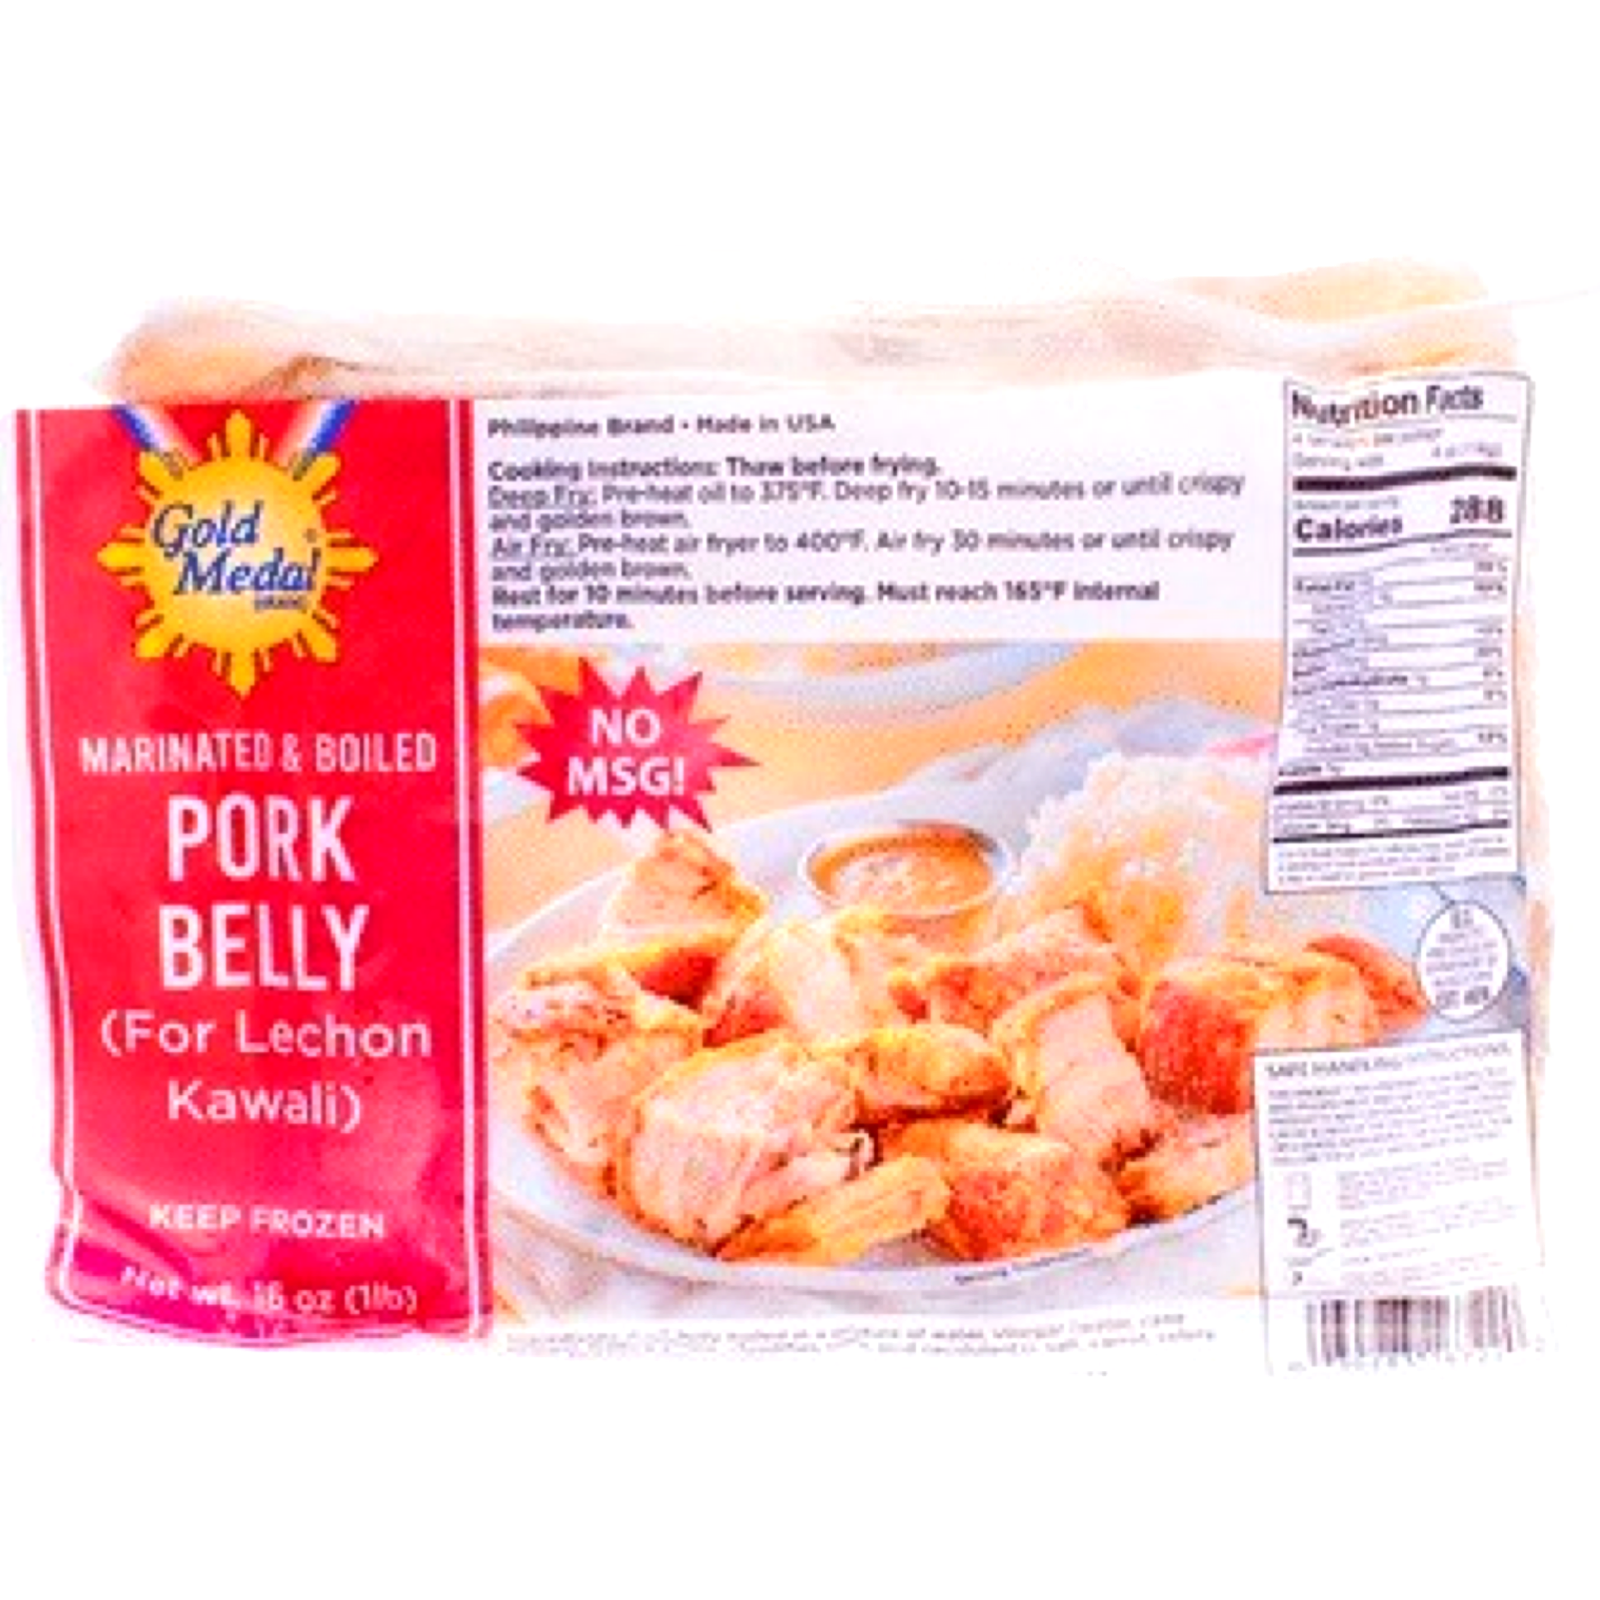 Gold Medal - Pork Belly (For Lechon Kawali) - Marinated - Ready To Fry - 16 OZ